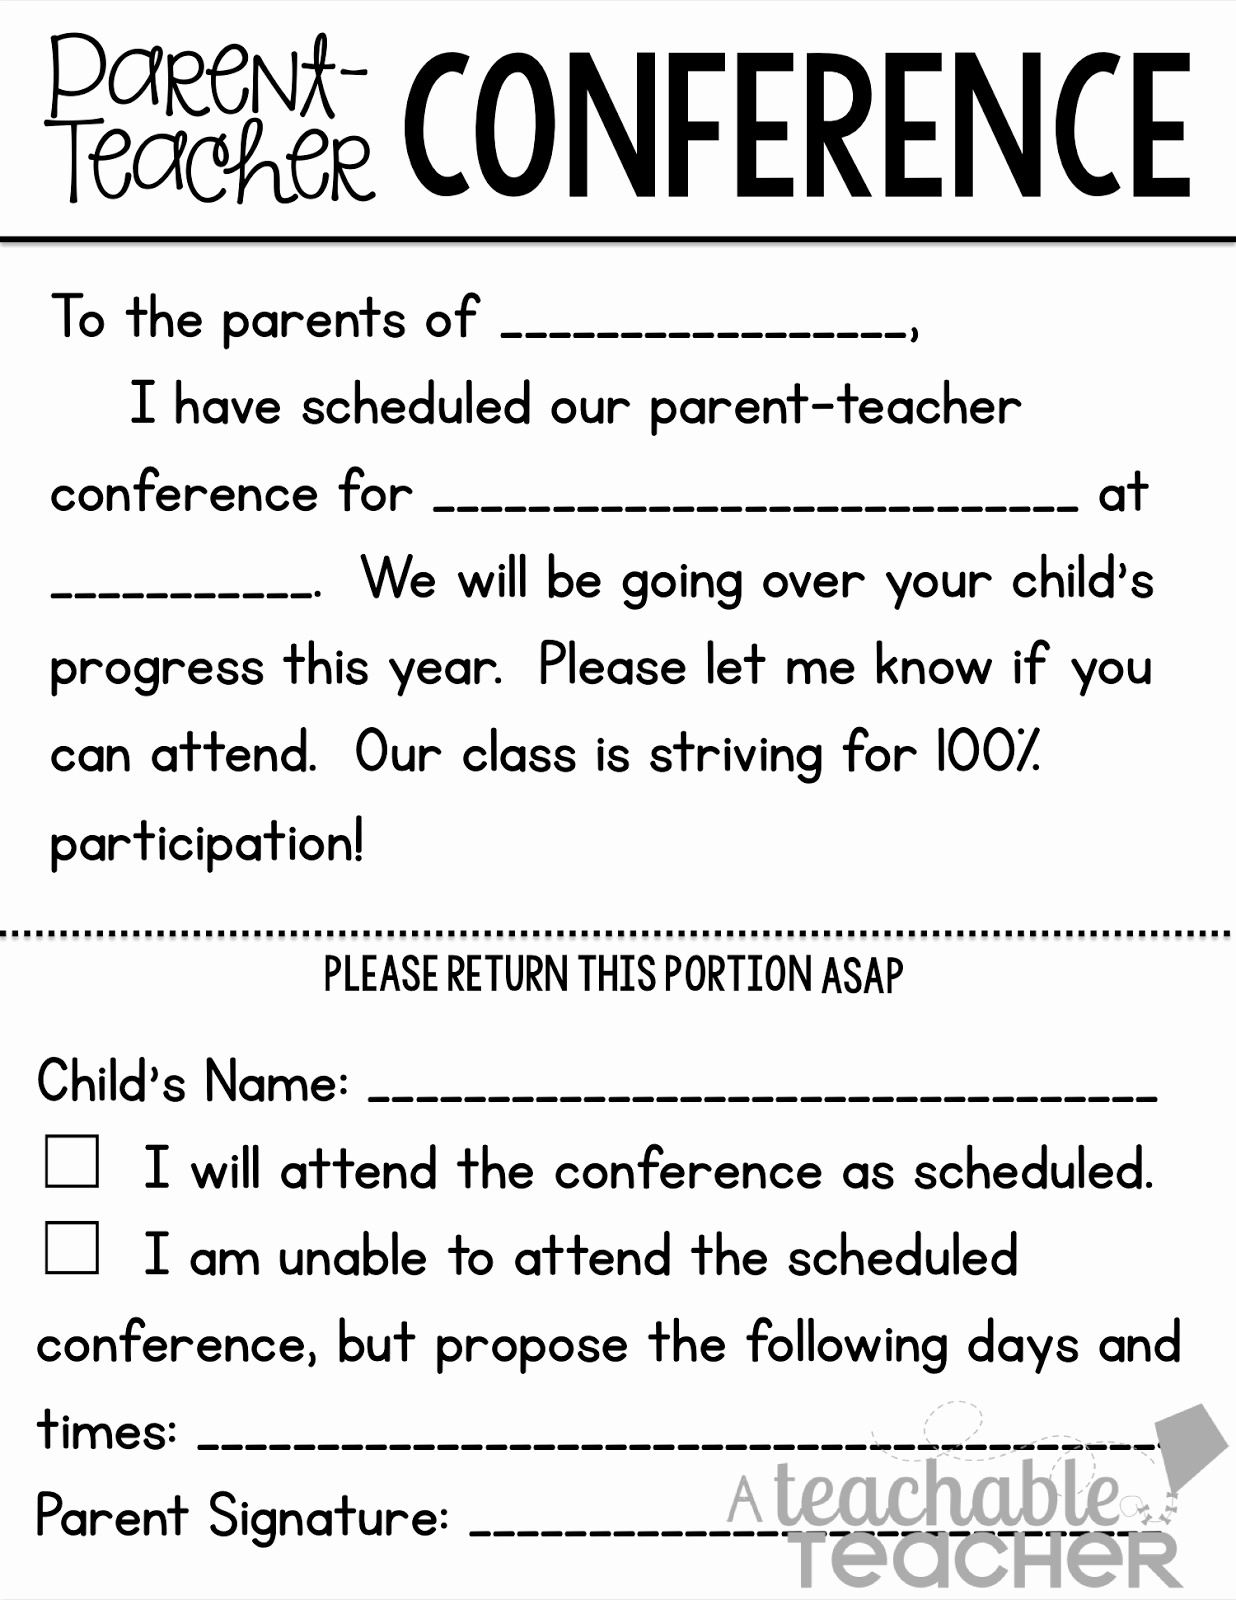 Parent Teacher Conference forms Inspirational A Teachable Teacher Parent Teacher Conference Tips and